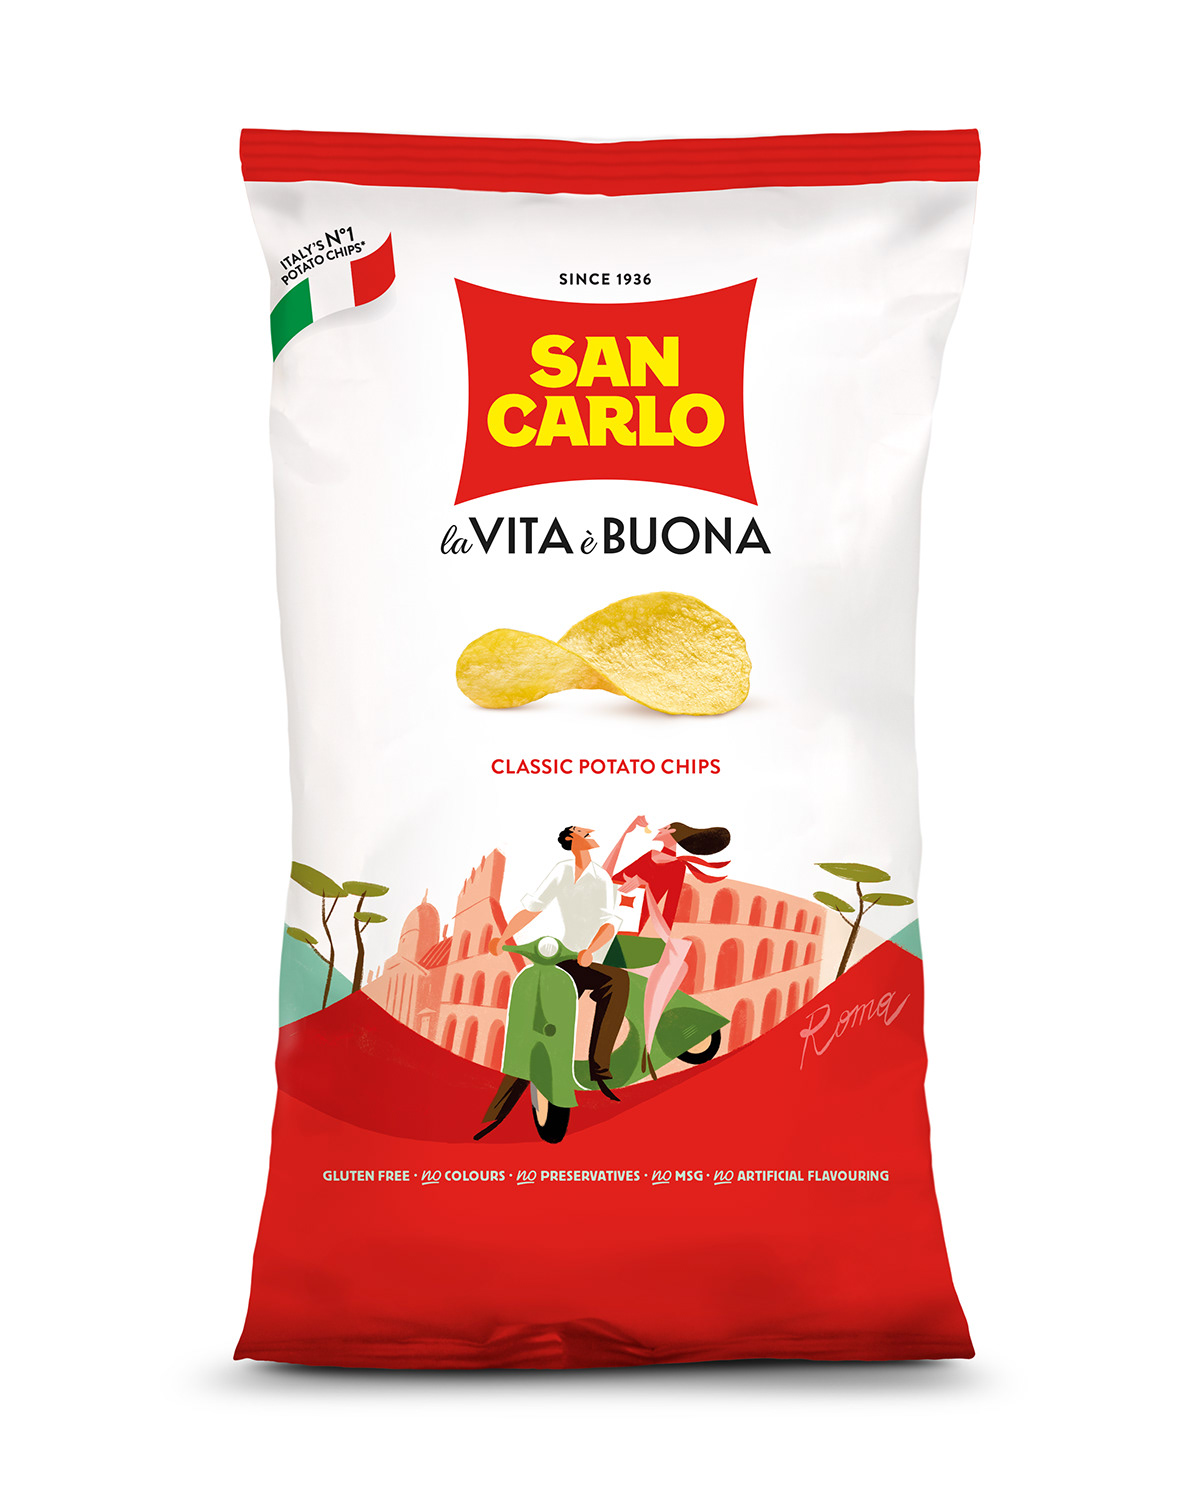 aperitivo chips foodie Italy MADEINITALY Packaging sancarlo snack